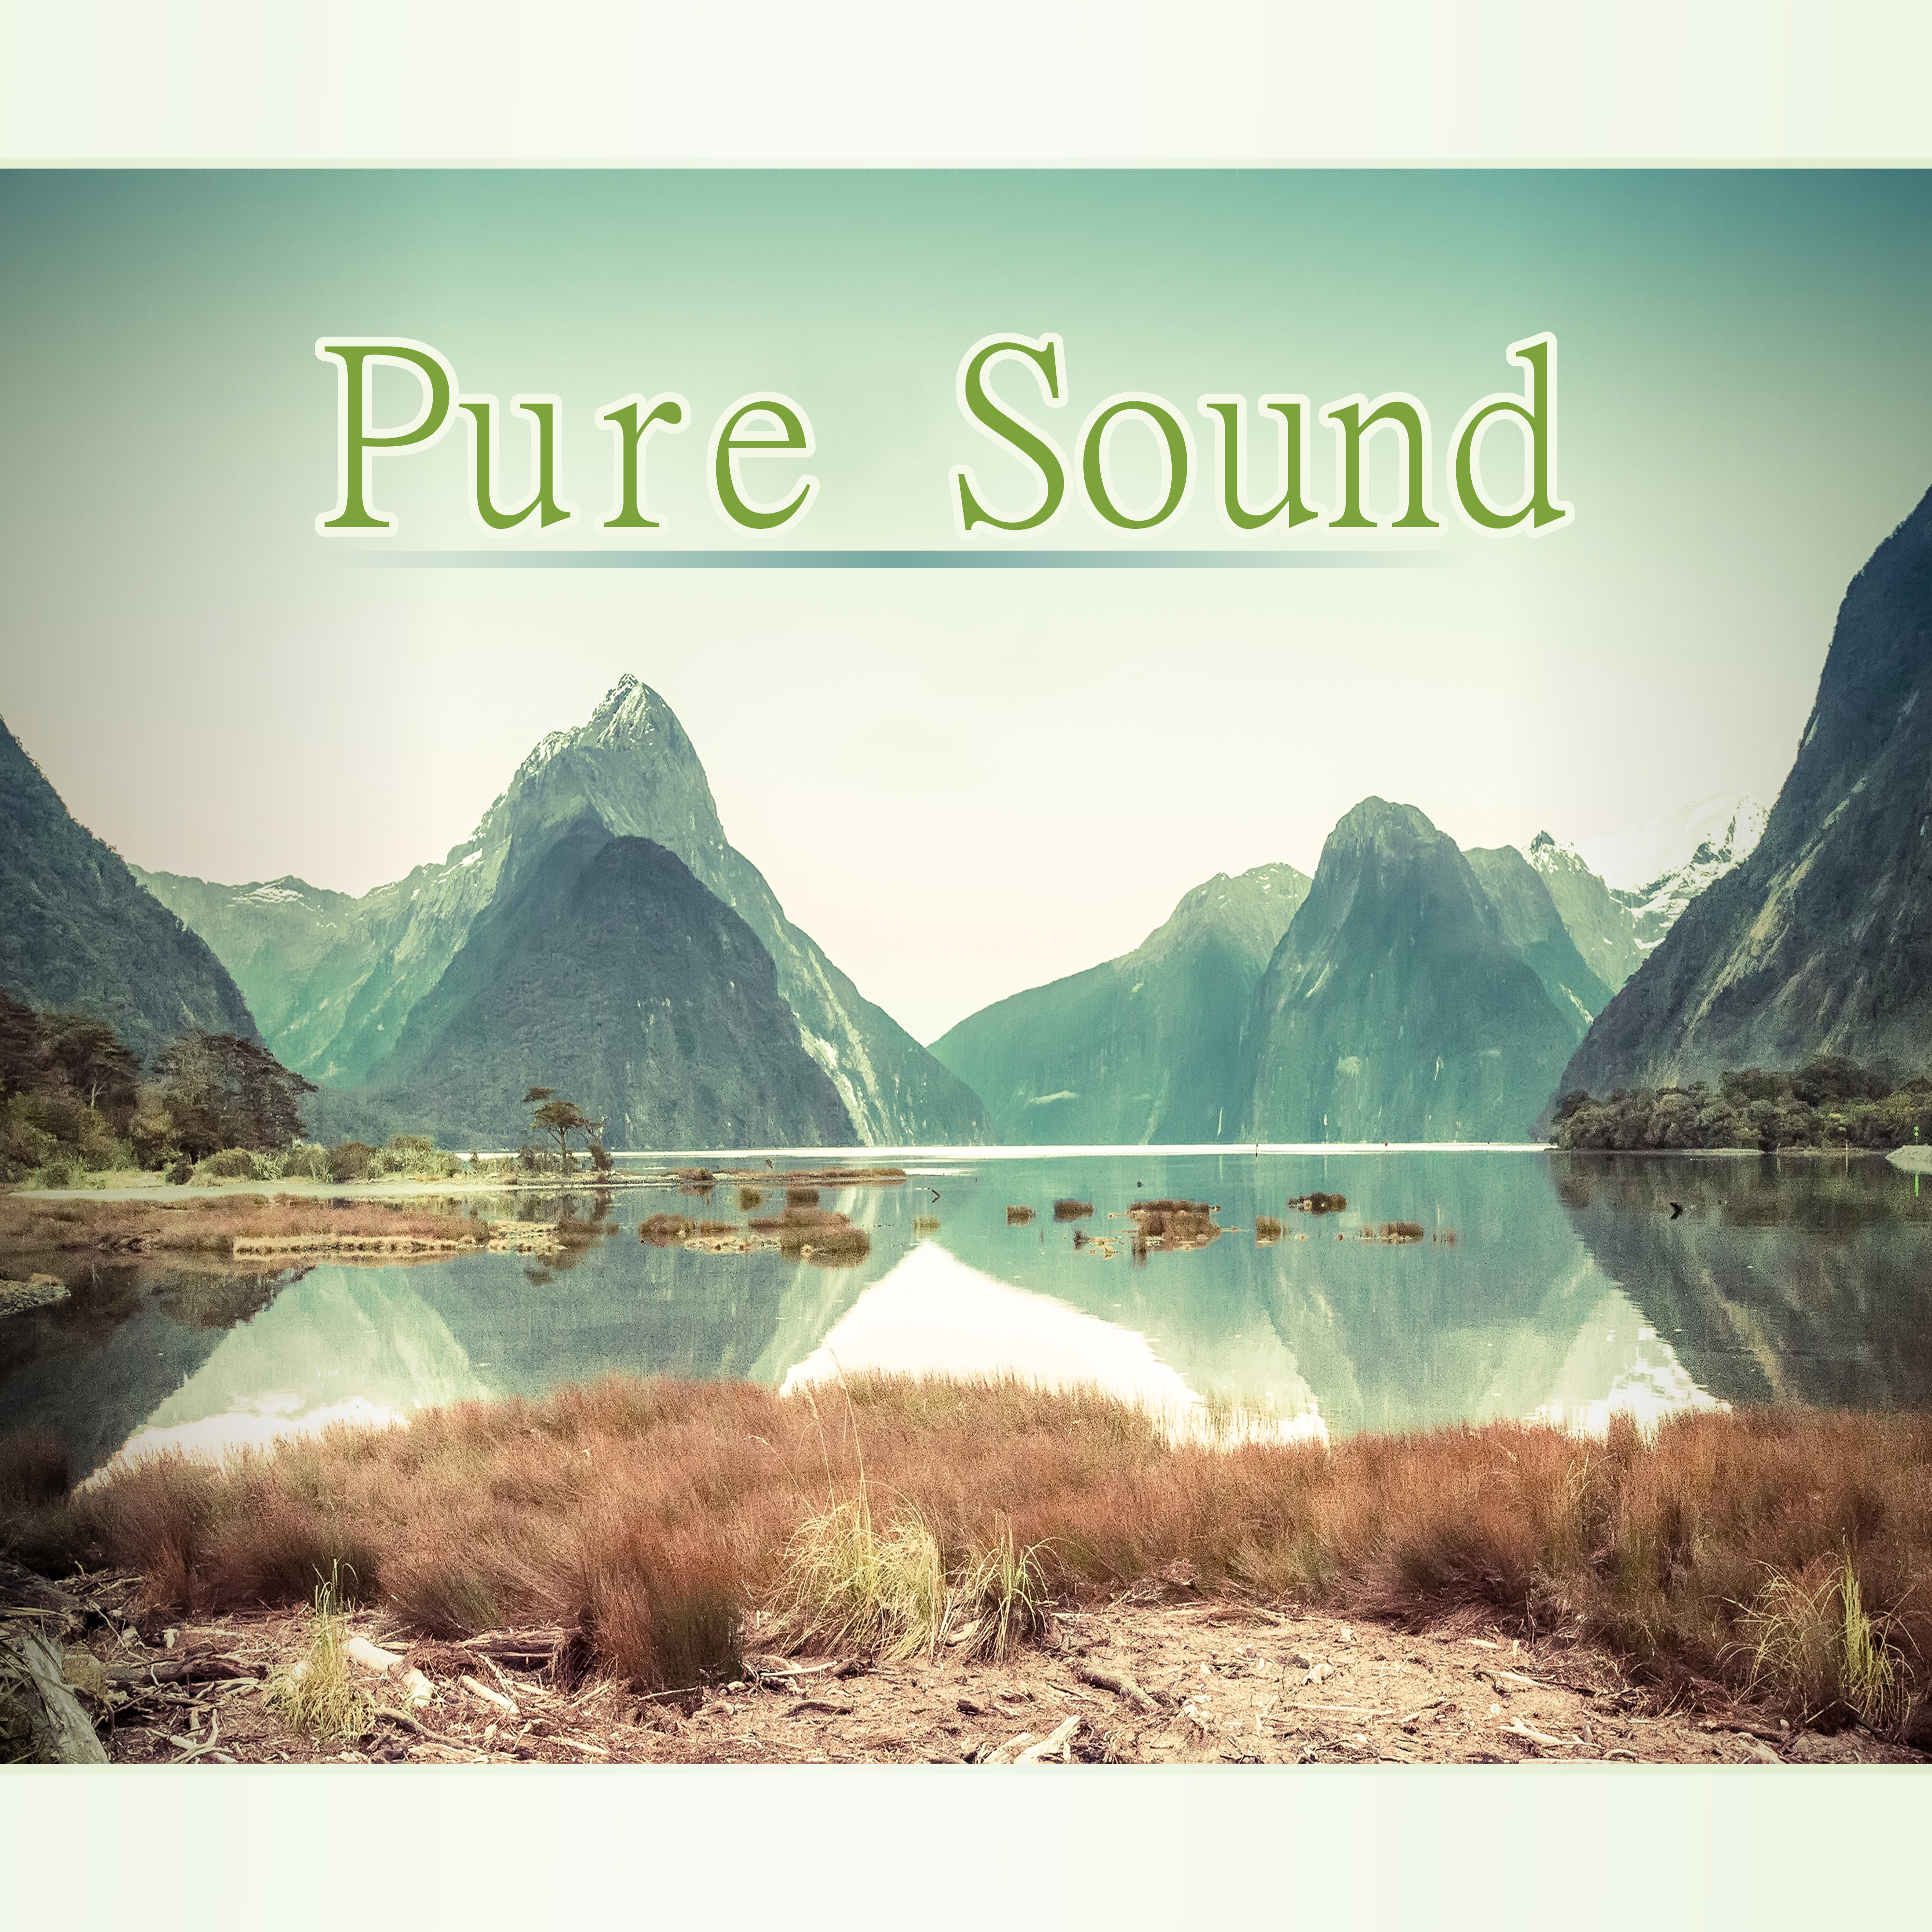 Pure Sound - Sound of Summer Rain, Calm Relaxing Nature Sounds, Water Sound Perfect for Sleep, Massage, Tai Chi, Meditation, Serenity Music to Reduce Anxiety and Sadness, Music for Babies